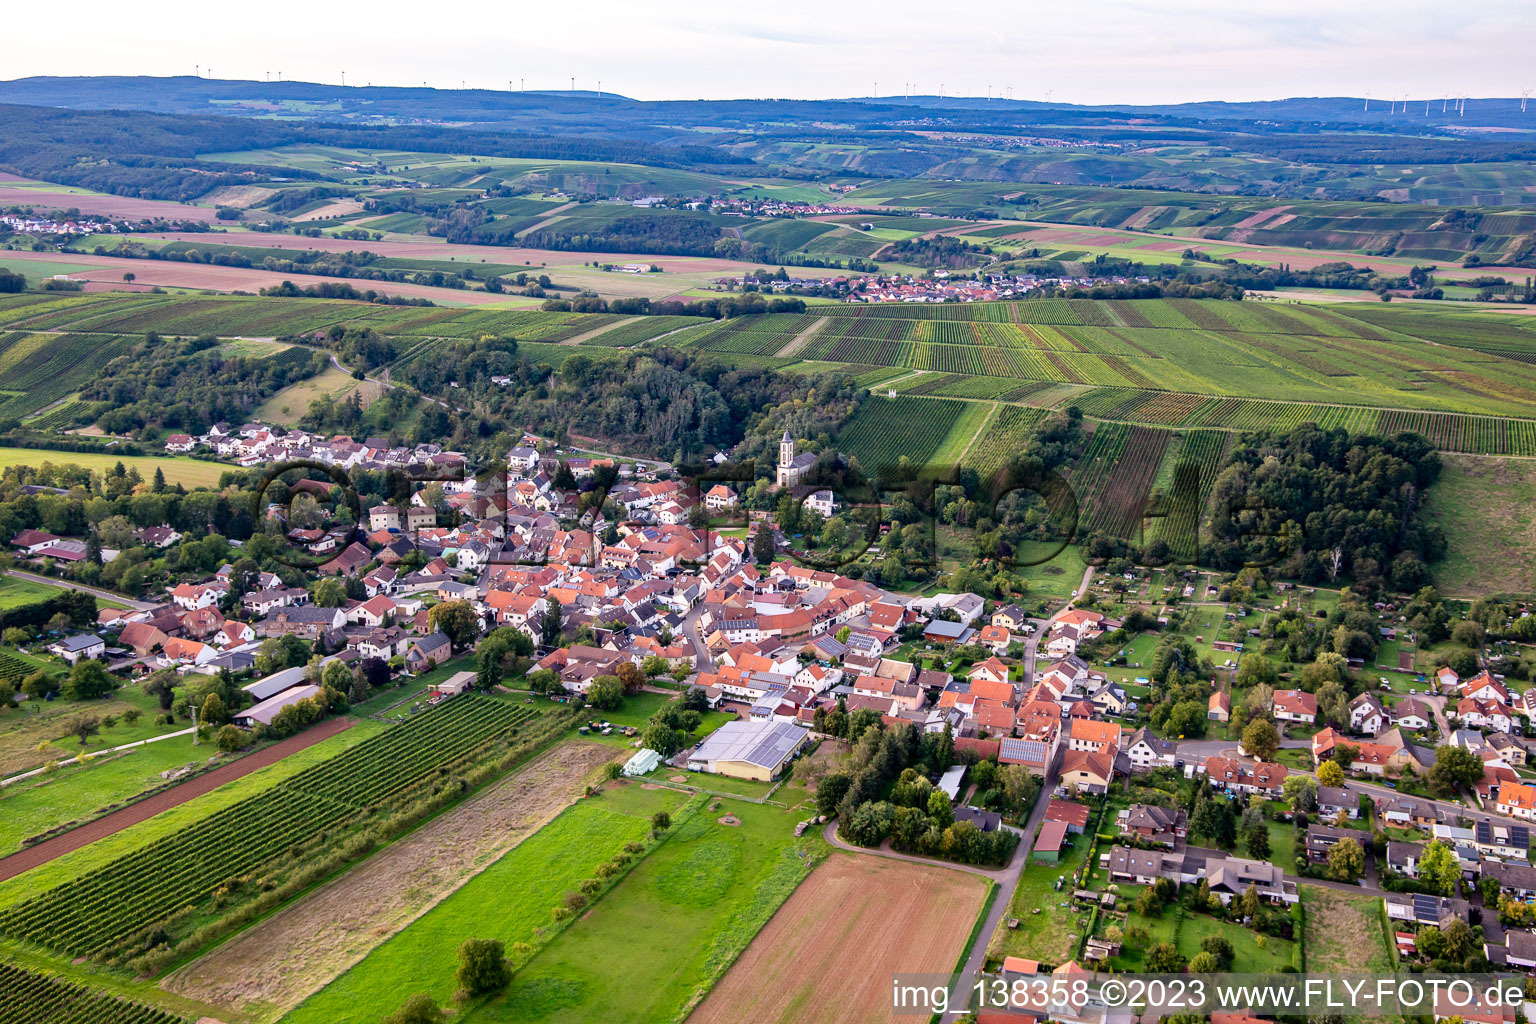 Aerial view of Mandel in the state Rhineland-Palatinate, Germany